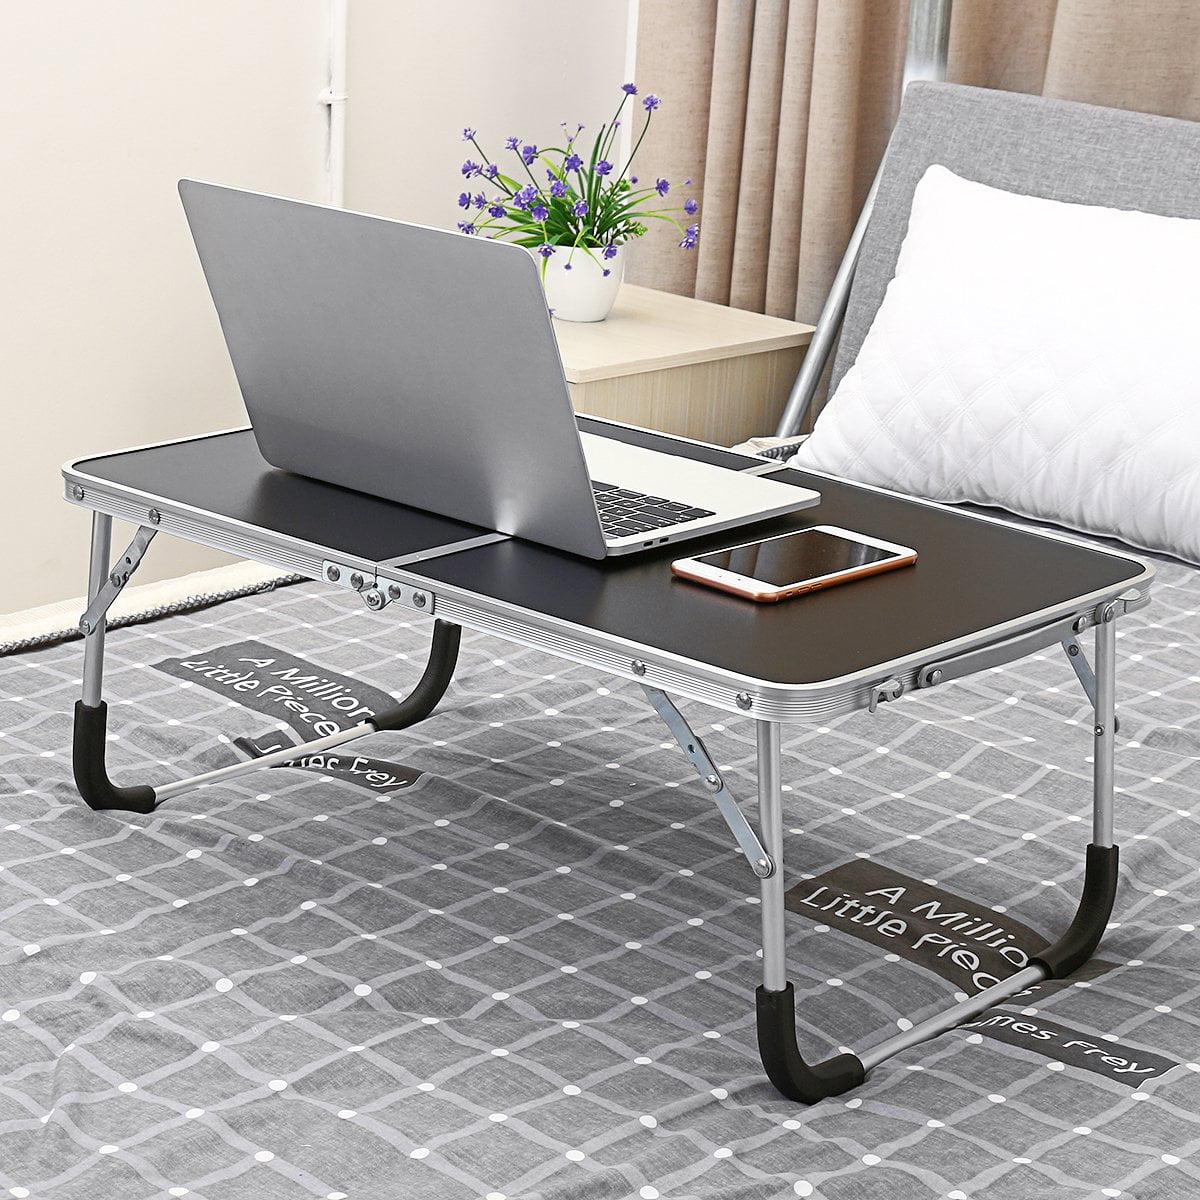 Bed Desk Portable Tray Laptop Table Notebook Stand Reading Holder with Foldable Legs & Cup Slot Reading Book Watching Movie on Bed/Couch/Sofa A